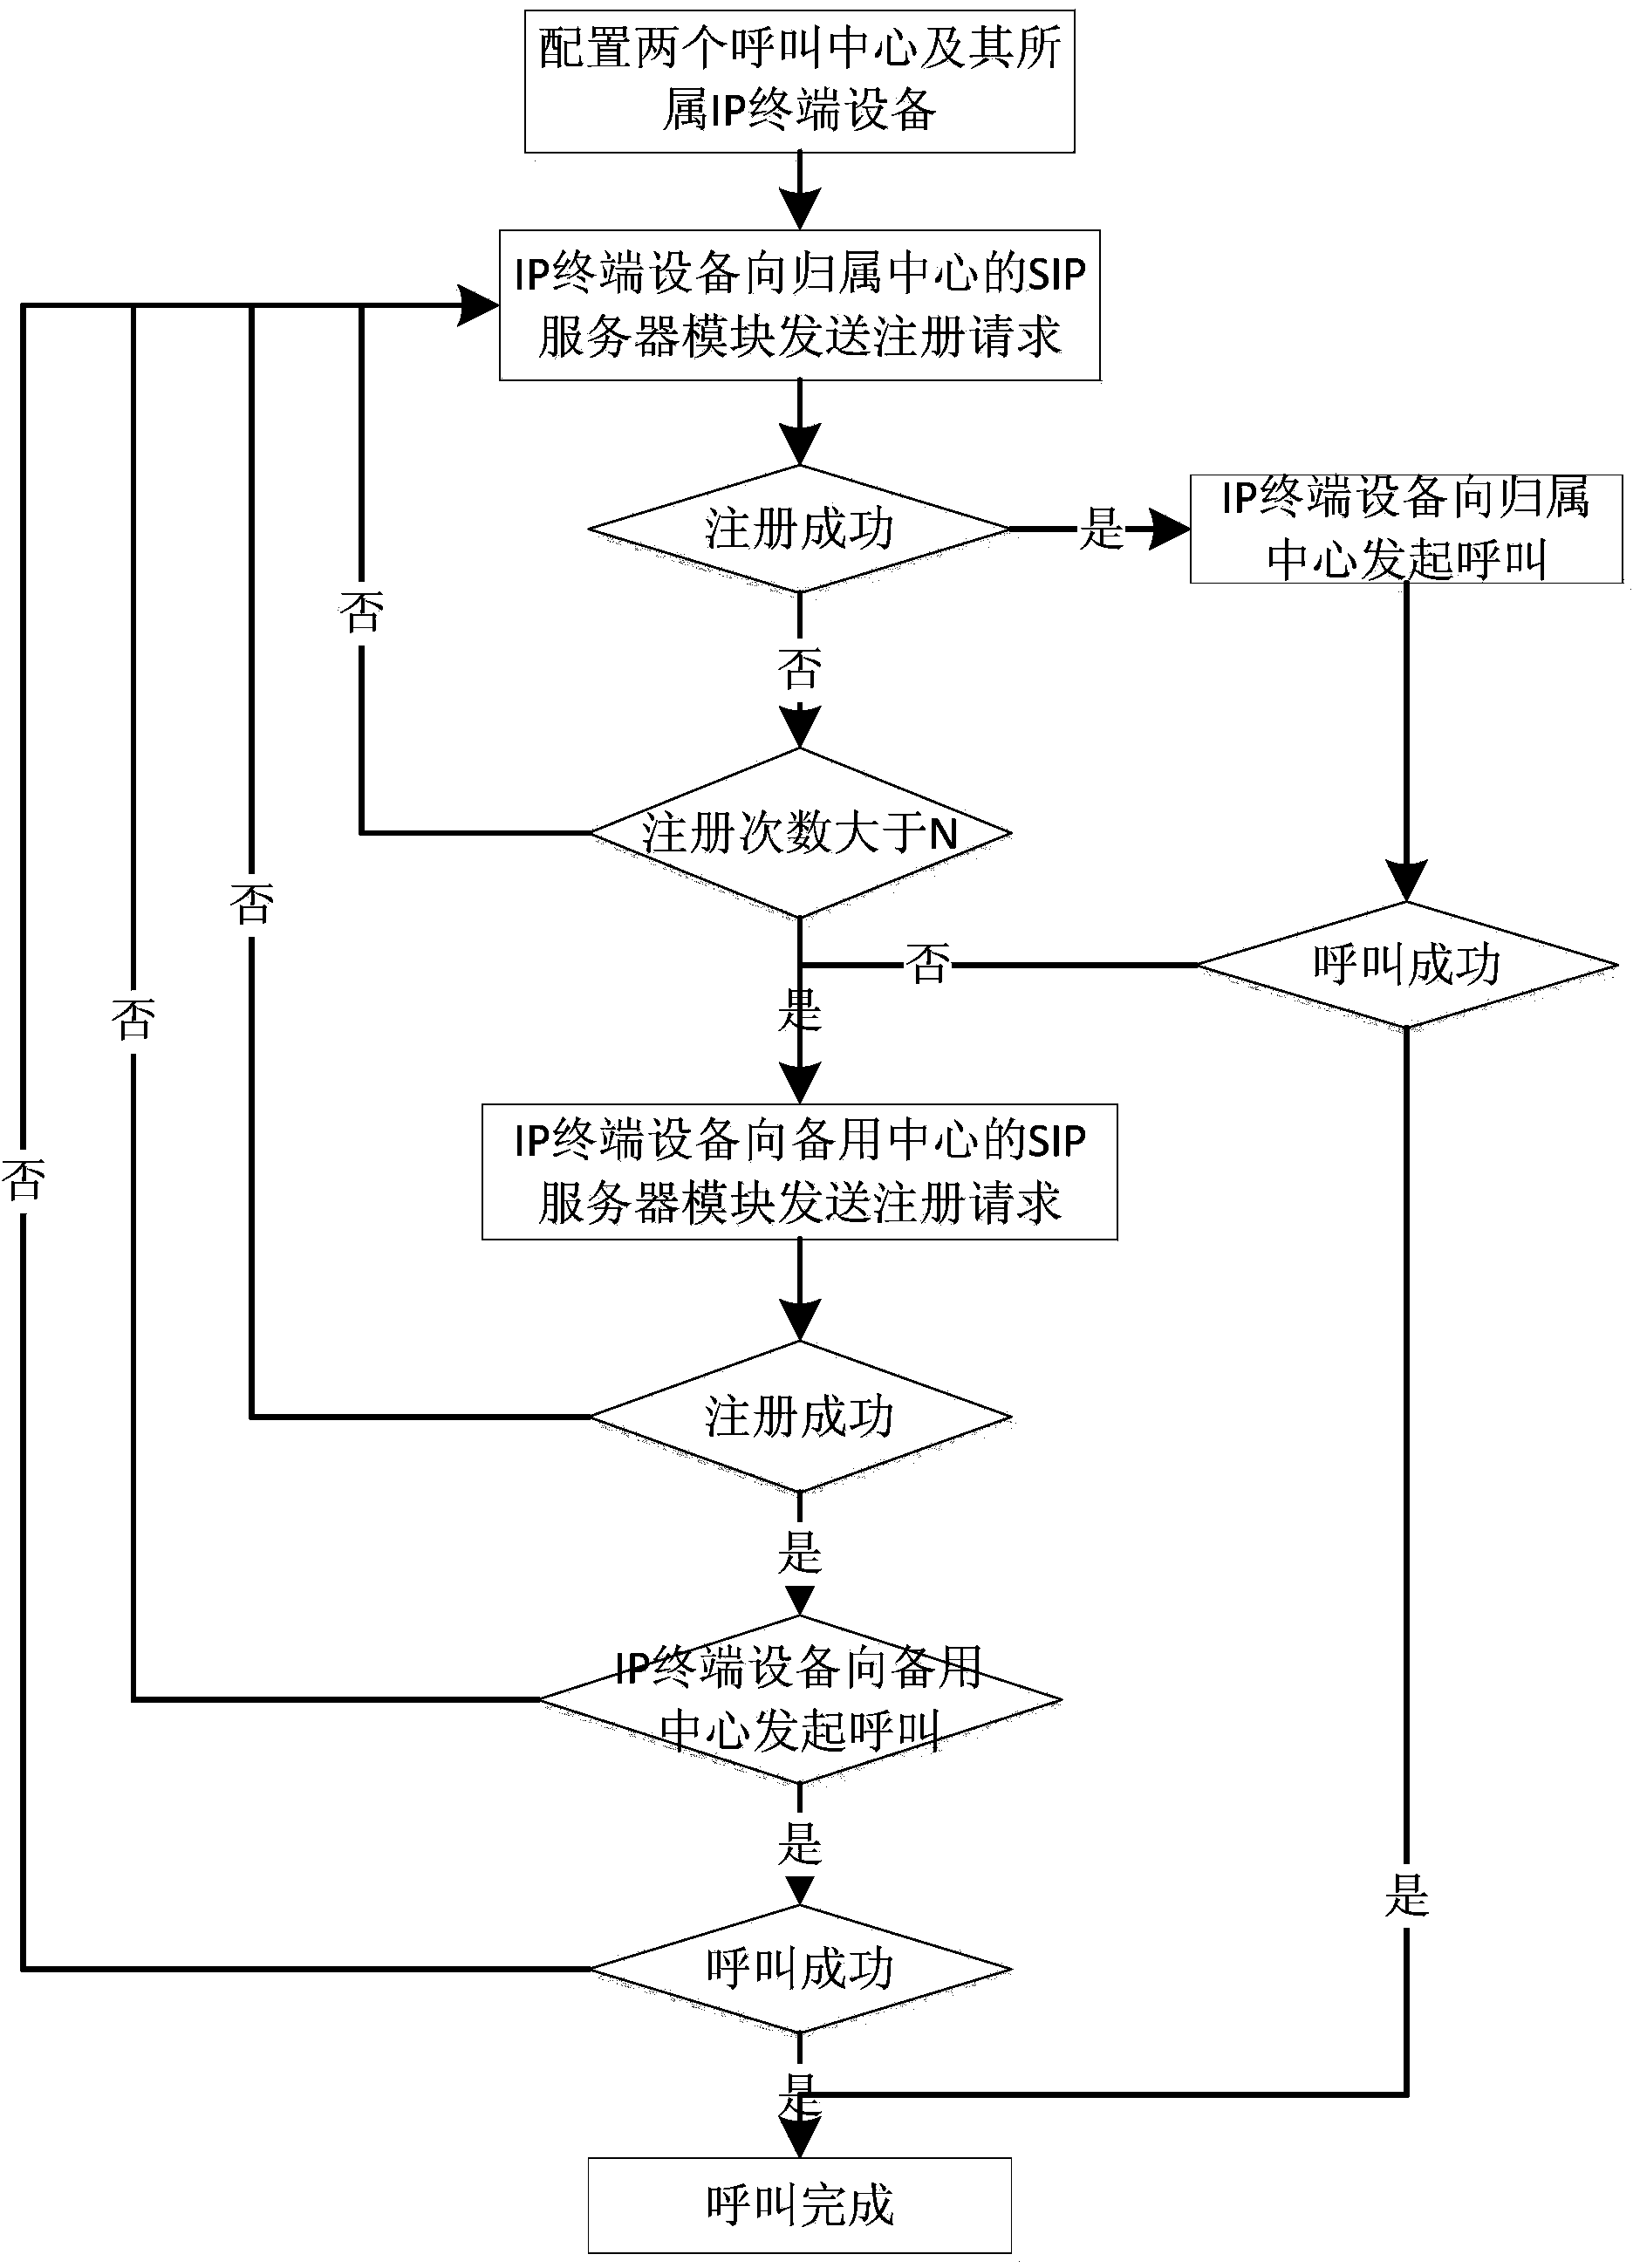 IP terminal device management system and method for double-center networking